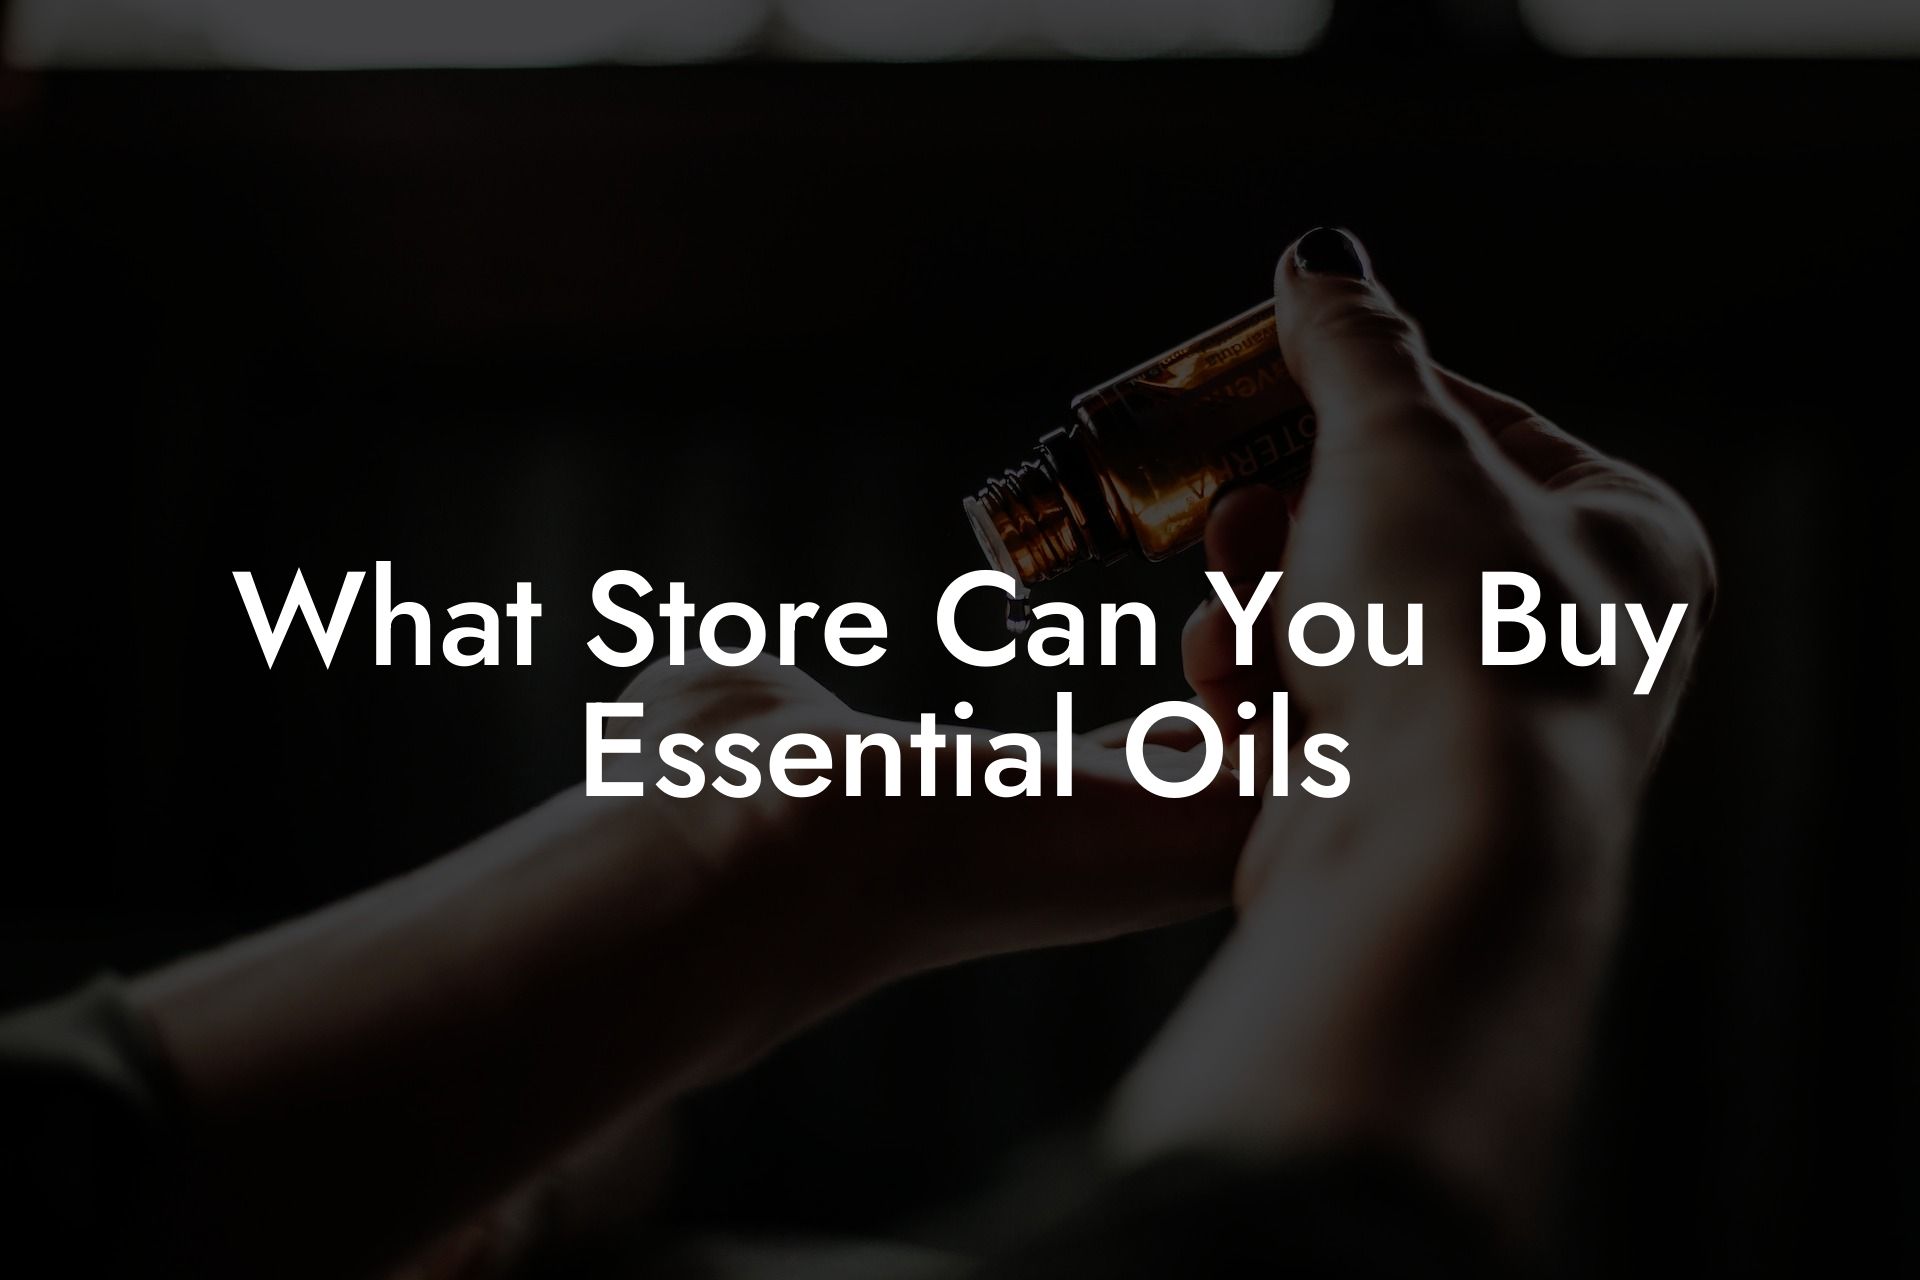 What Store Can You Buy Essential Oils